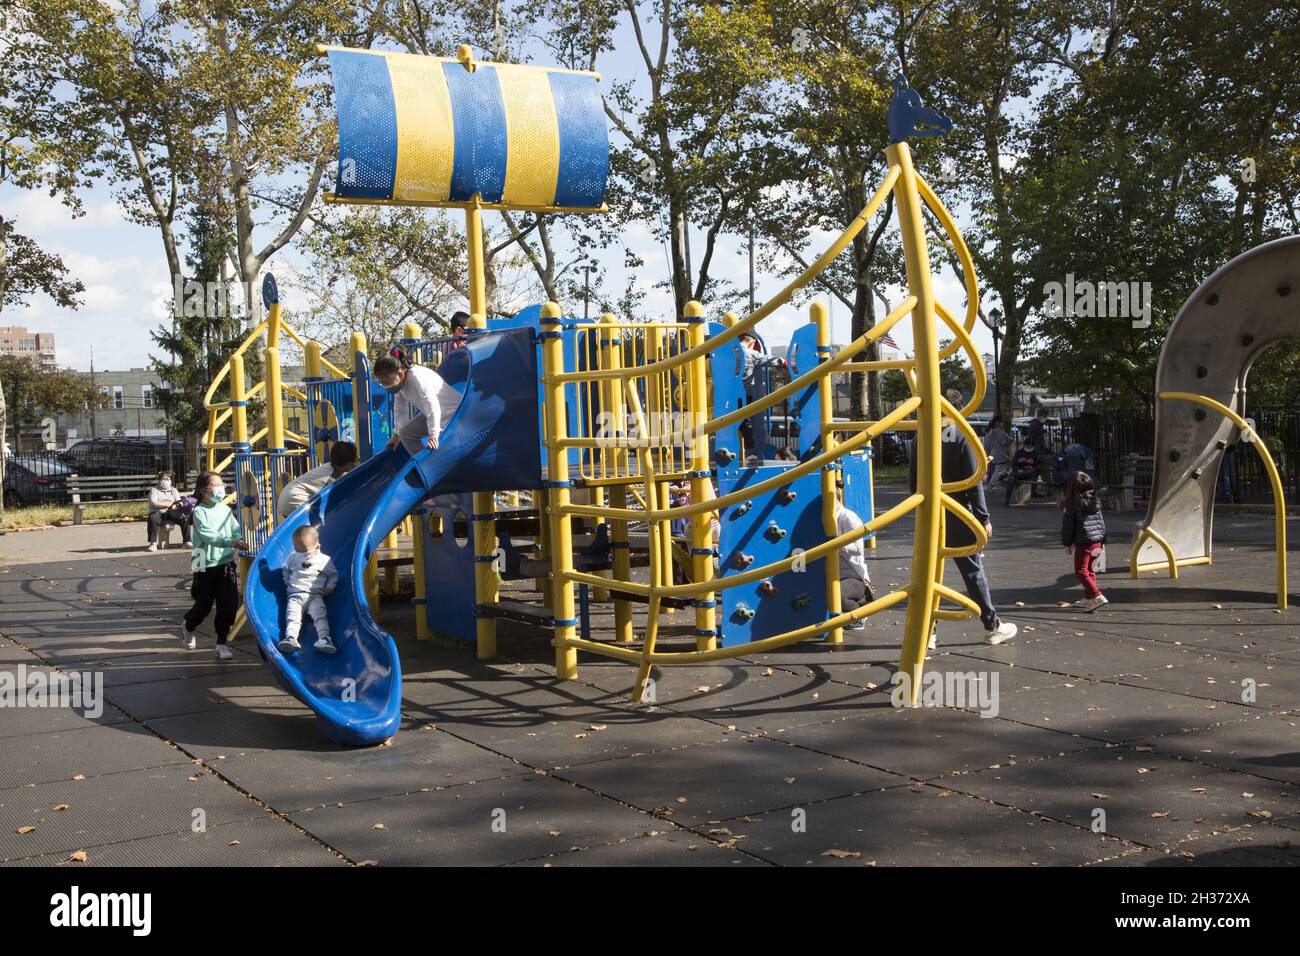 Children play on the Viking ship jungle gym at Leif Ericson Park in Brooklyn, New York. Stock Photo